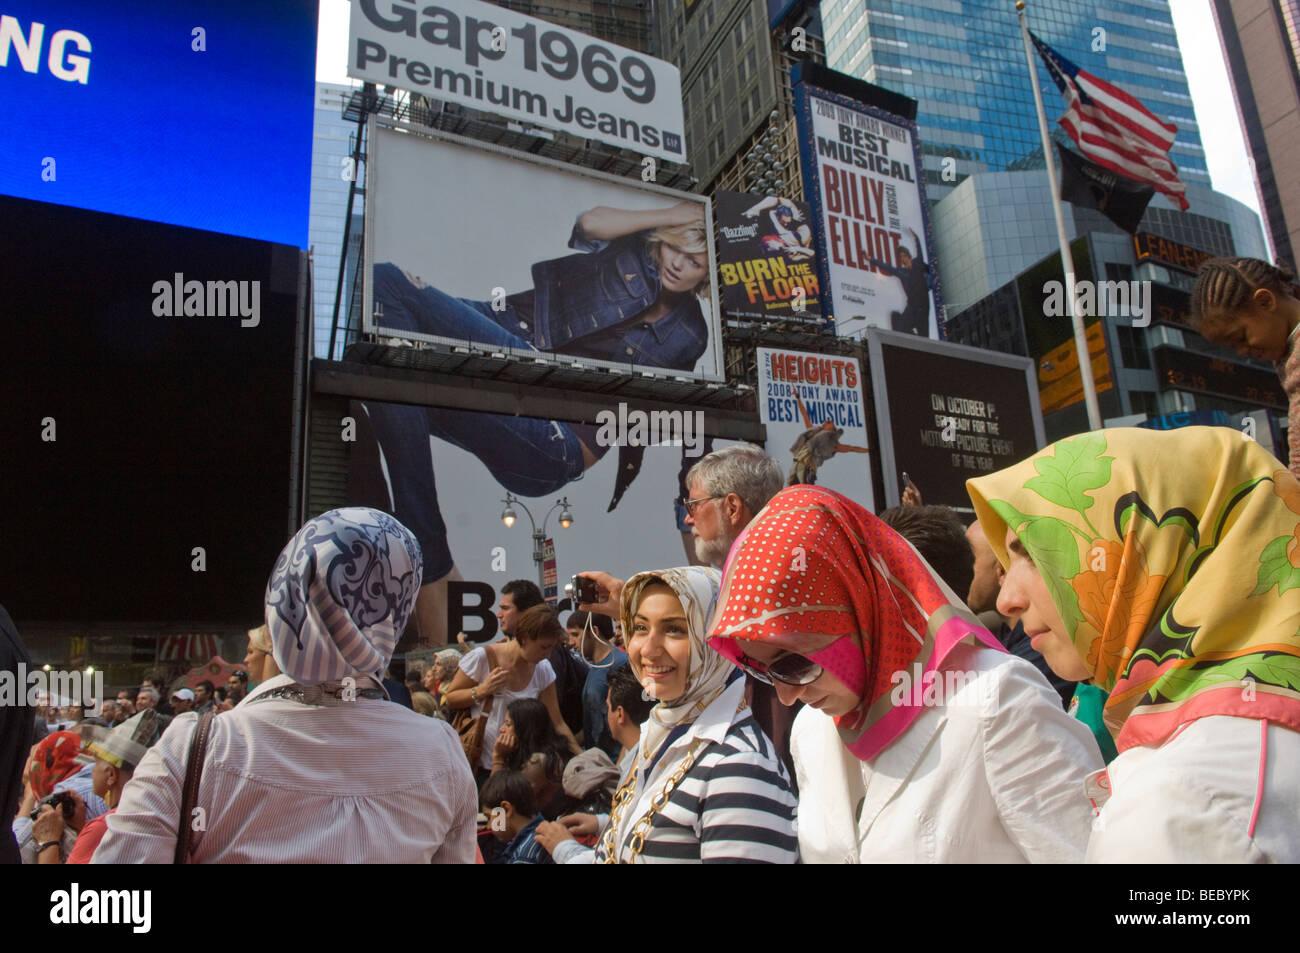 Women wear headscarves at a Turkish Festival in New York Stock Photo